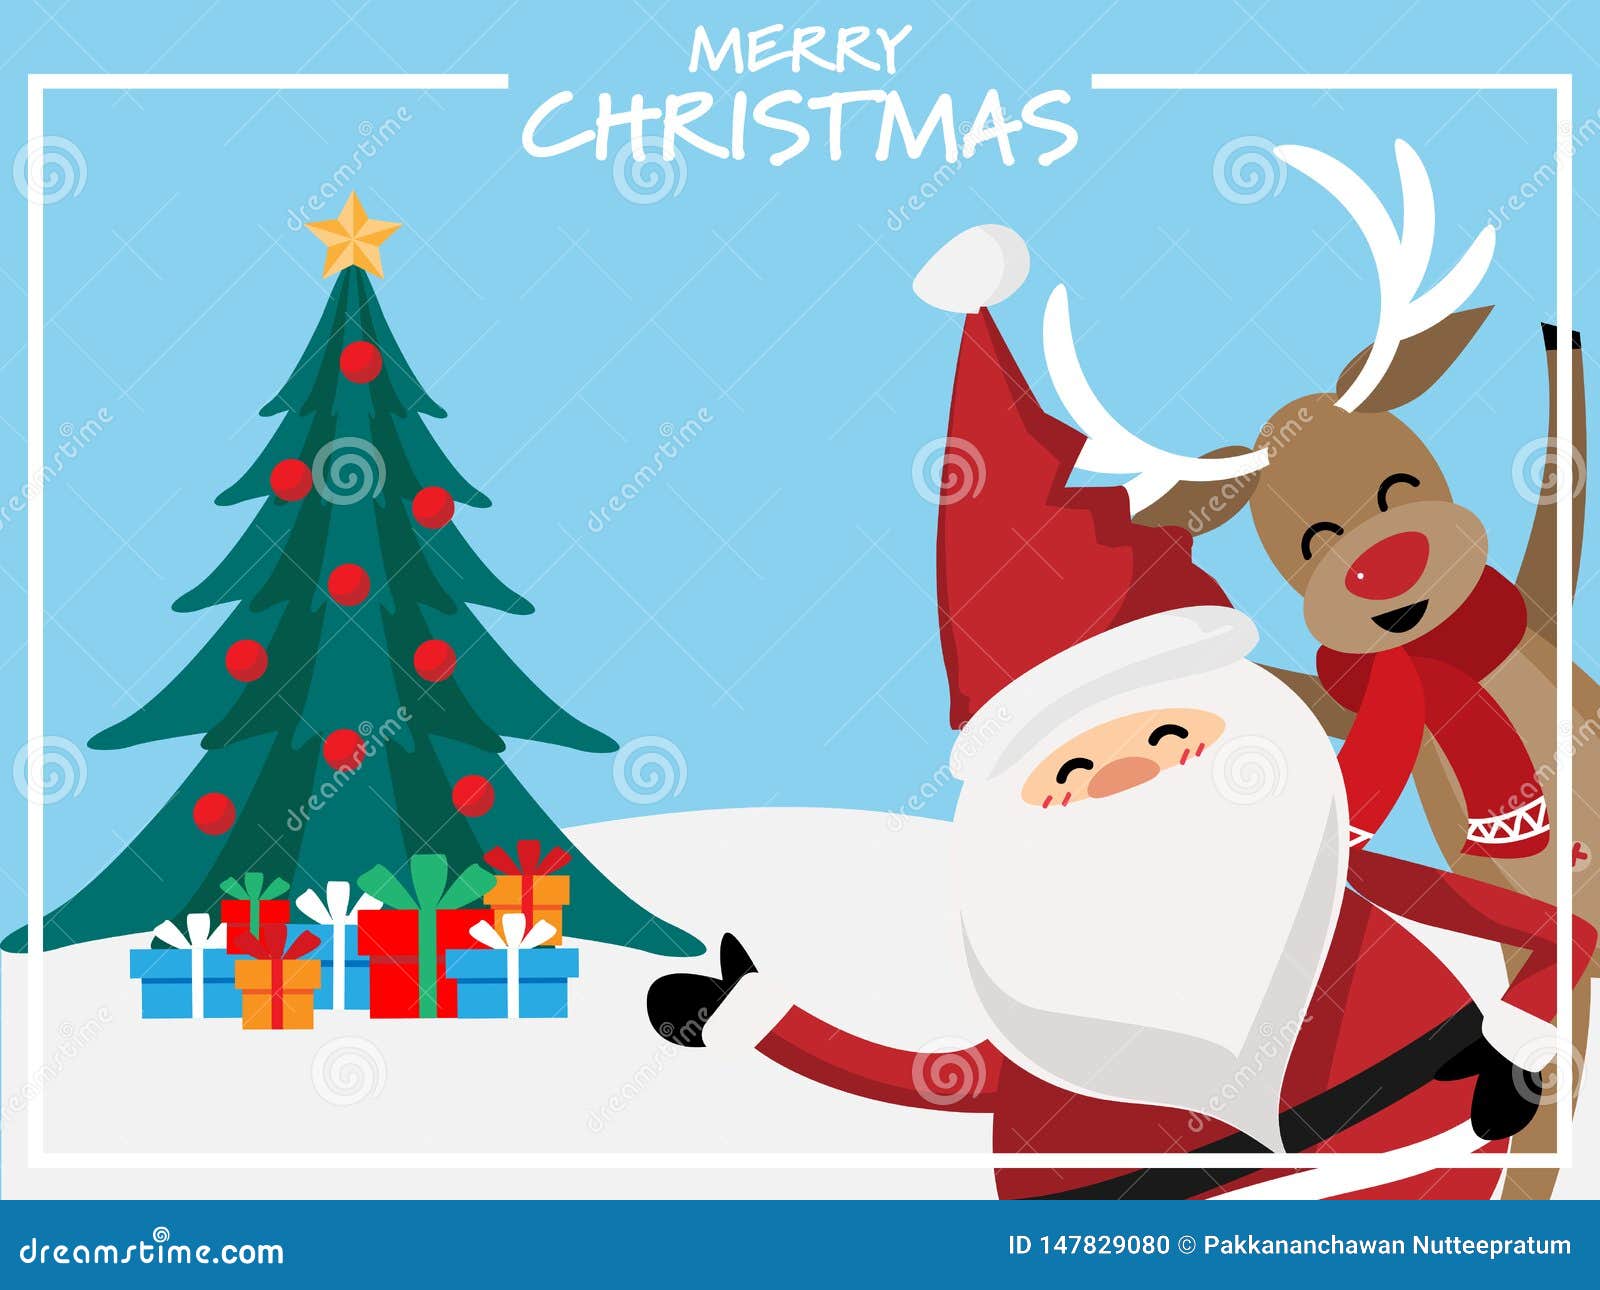 Christmas Holiday Season Background with Christmas Cartoon of Santa Claus,  Reindeer, Gift Box and Christmas Tree. Stock Vector - Illustration of tree,  background: 147829080